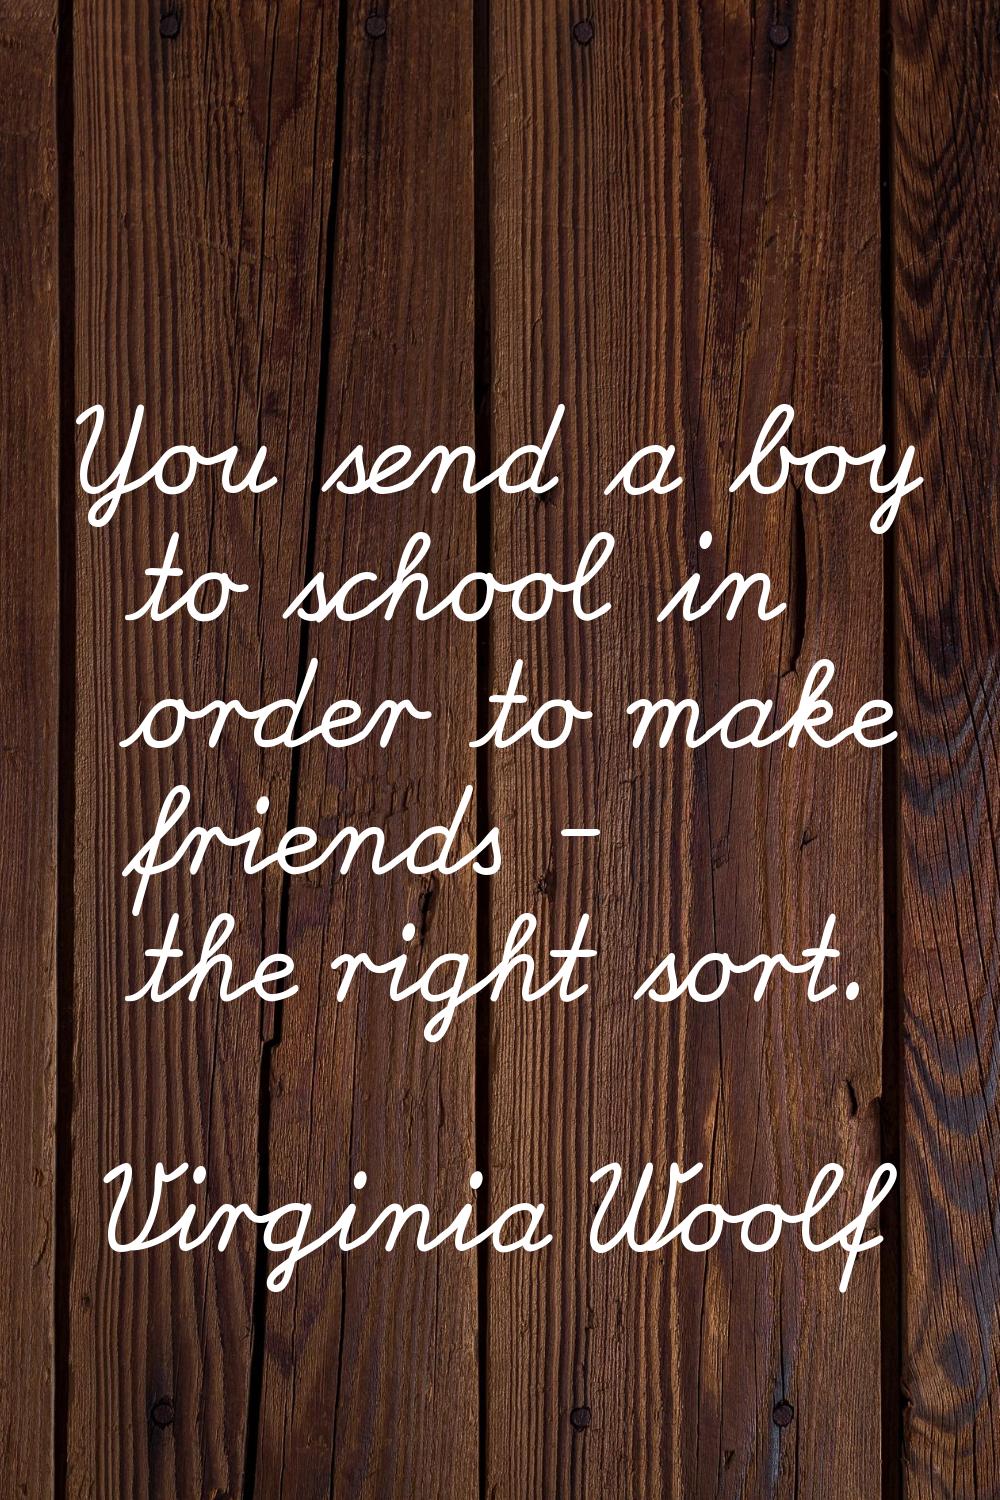 You send a boy to school in order to make friends - the right sort.